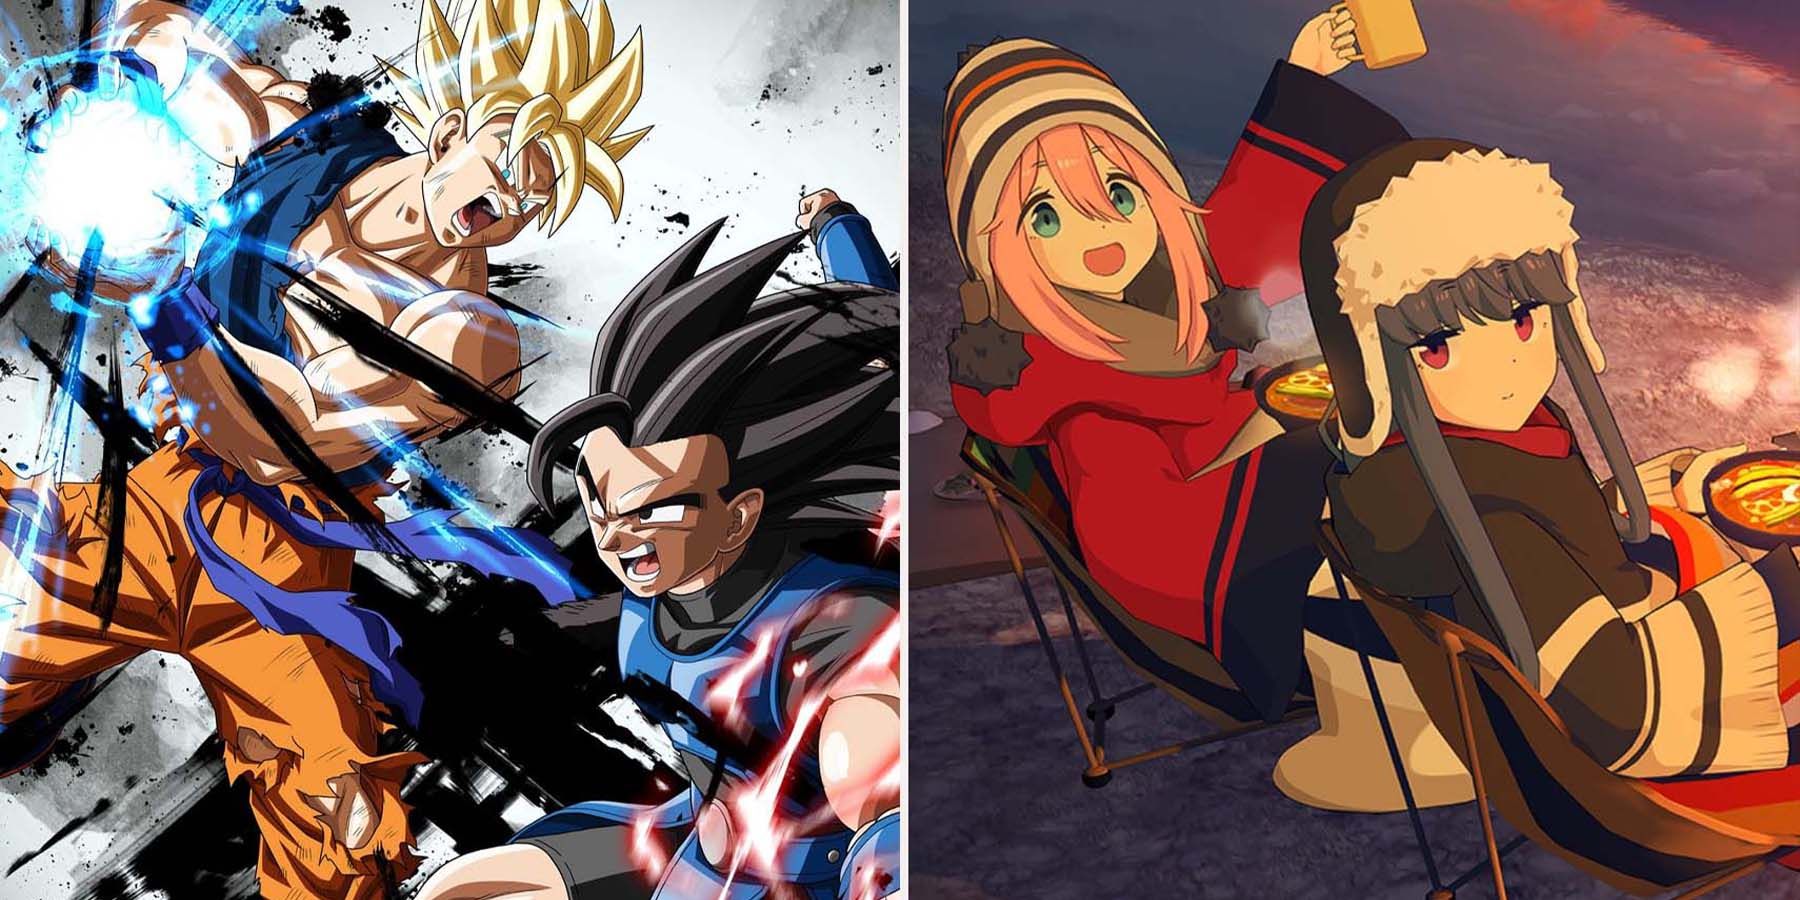 8 Best Mobile Games Based On Anime featured image cropped